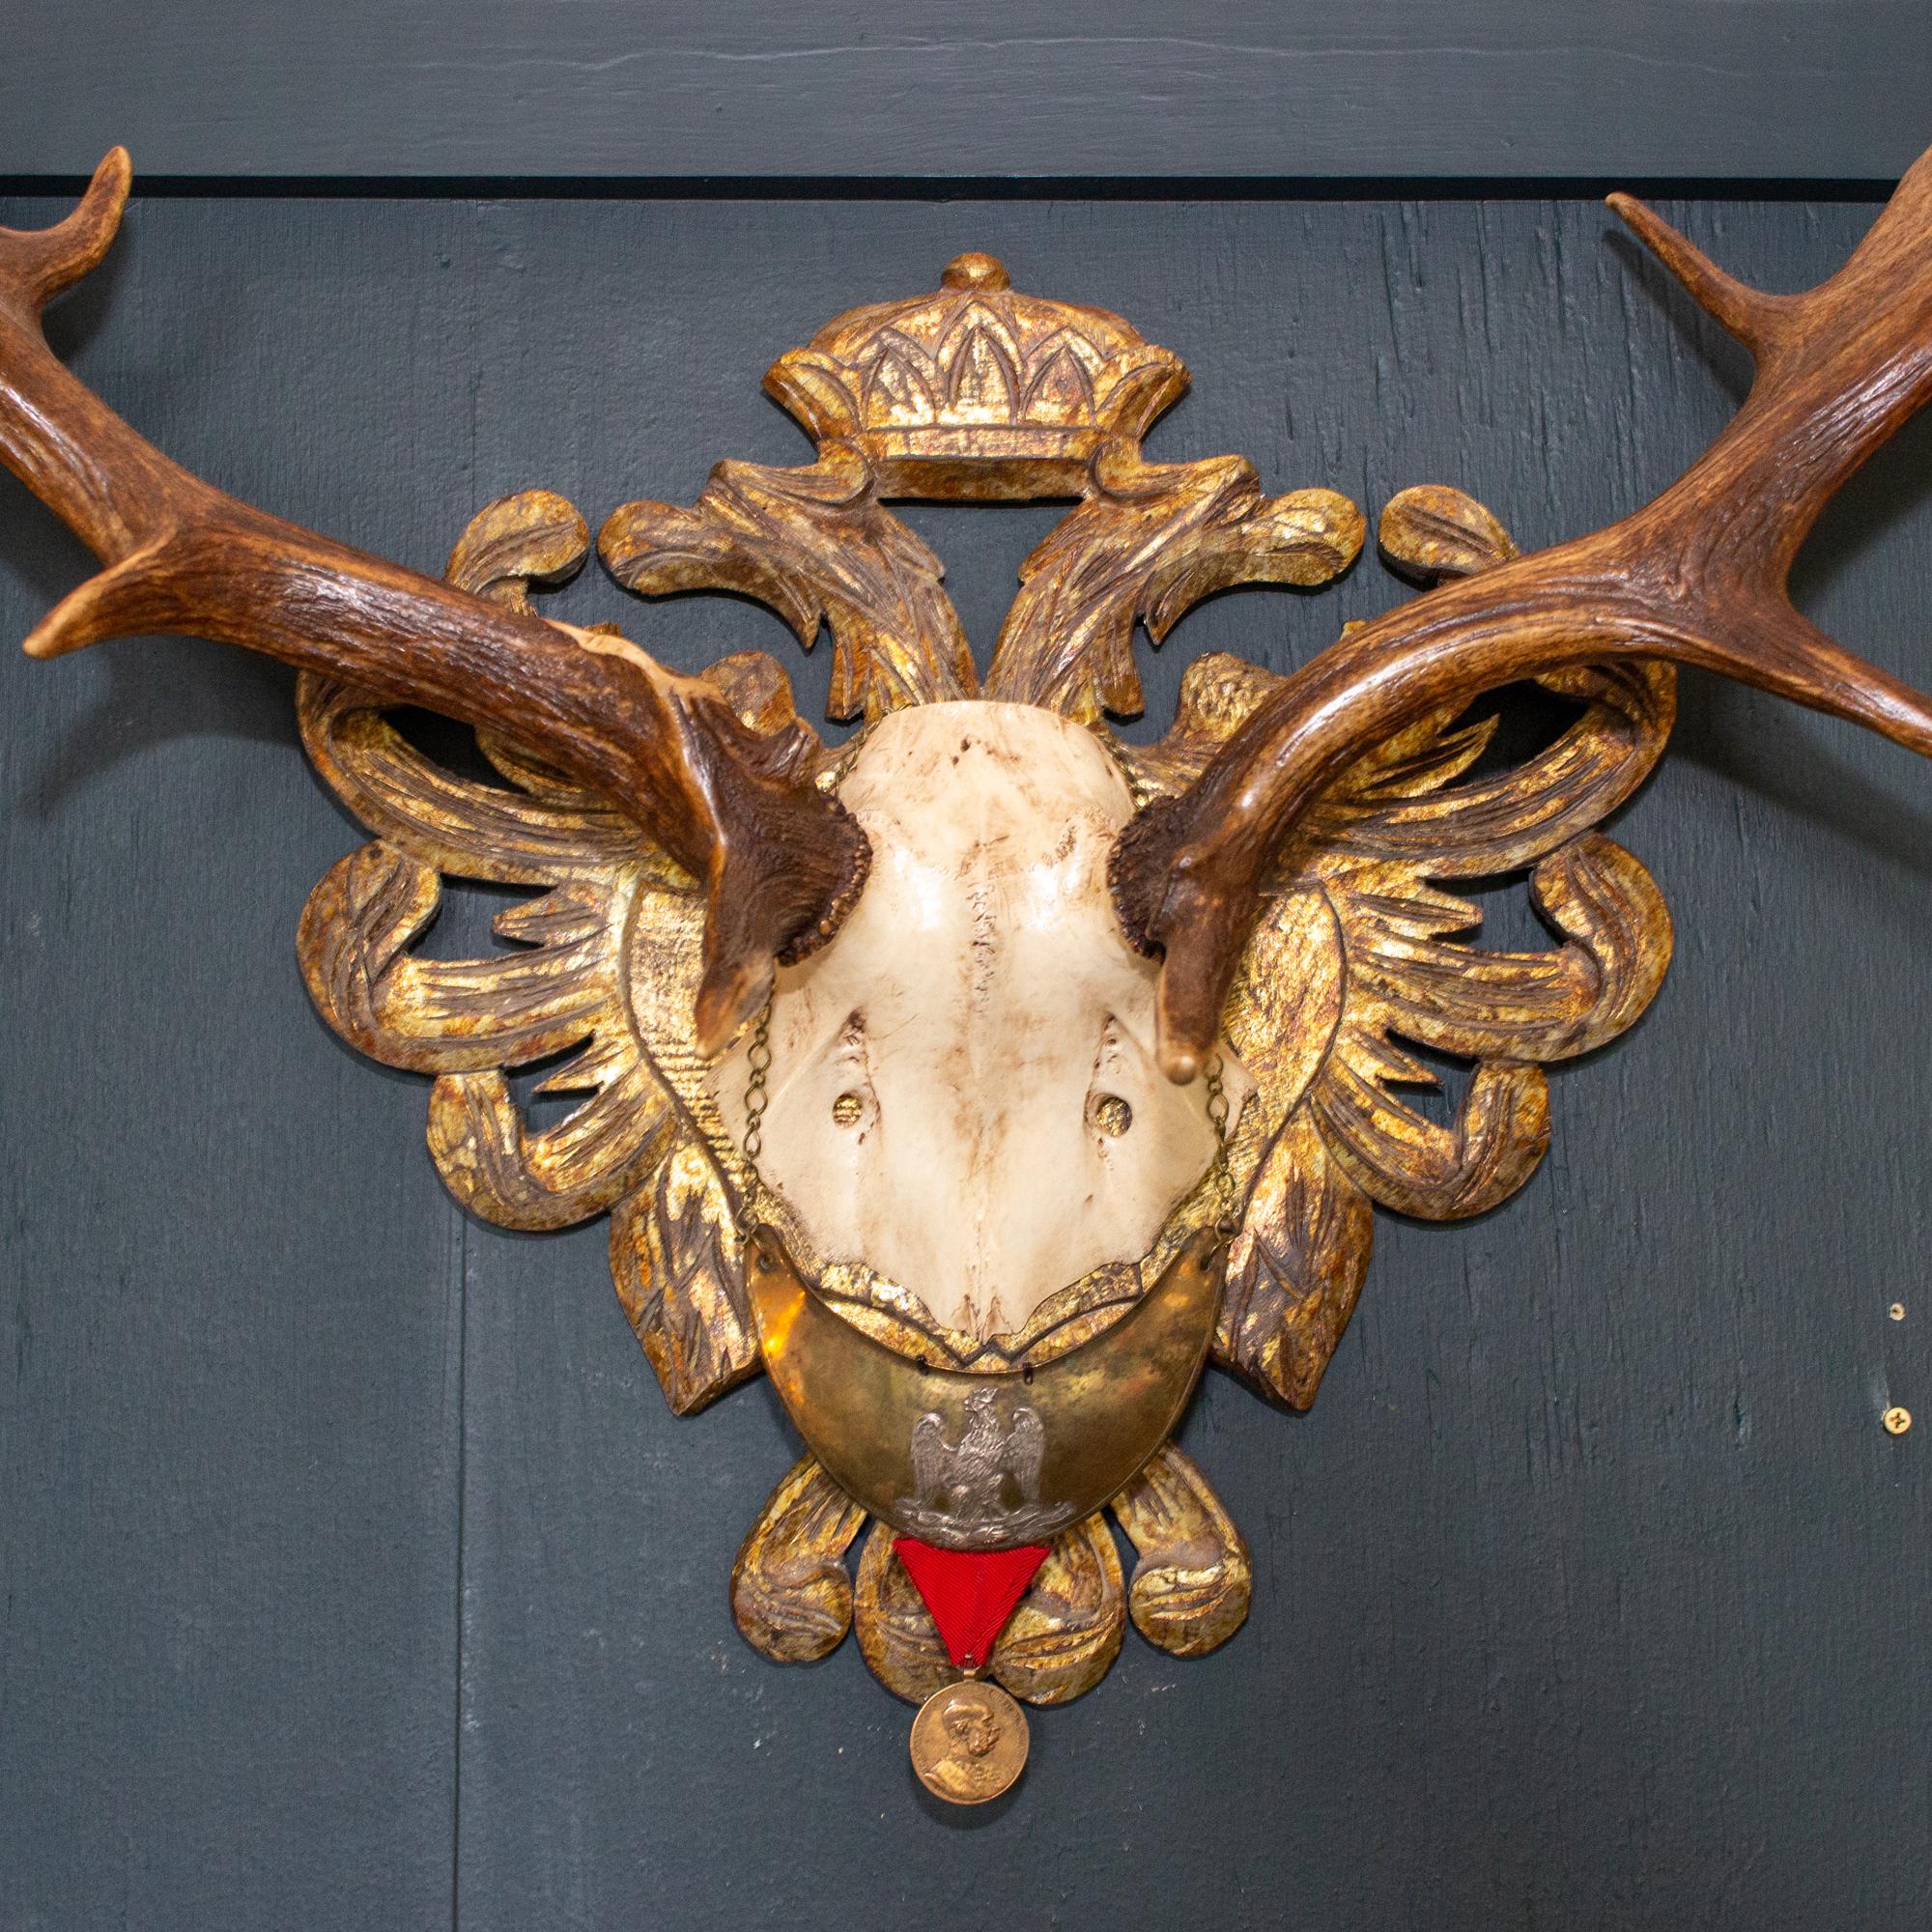 This historical 19th century Habsburg fallow deer trophy is mounted on a hand carved, gold gilt Habsburg double-headed eagle back plaque representing the the Austro-Hungarian Empire (where Emperor Franz Joseph was Emperor of Austria and King of